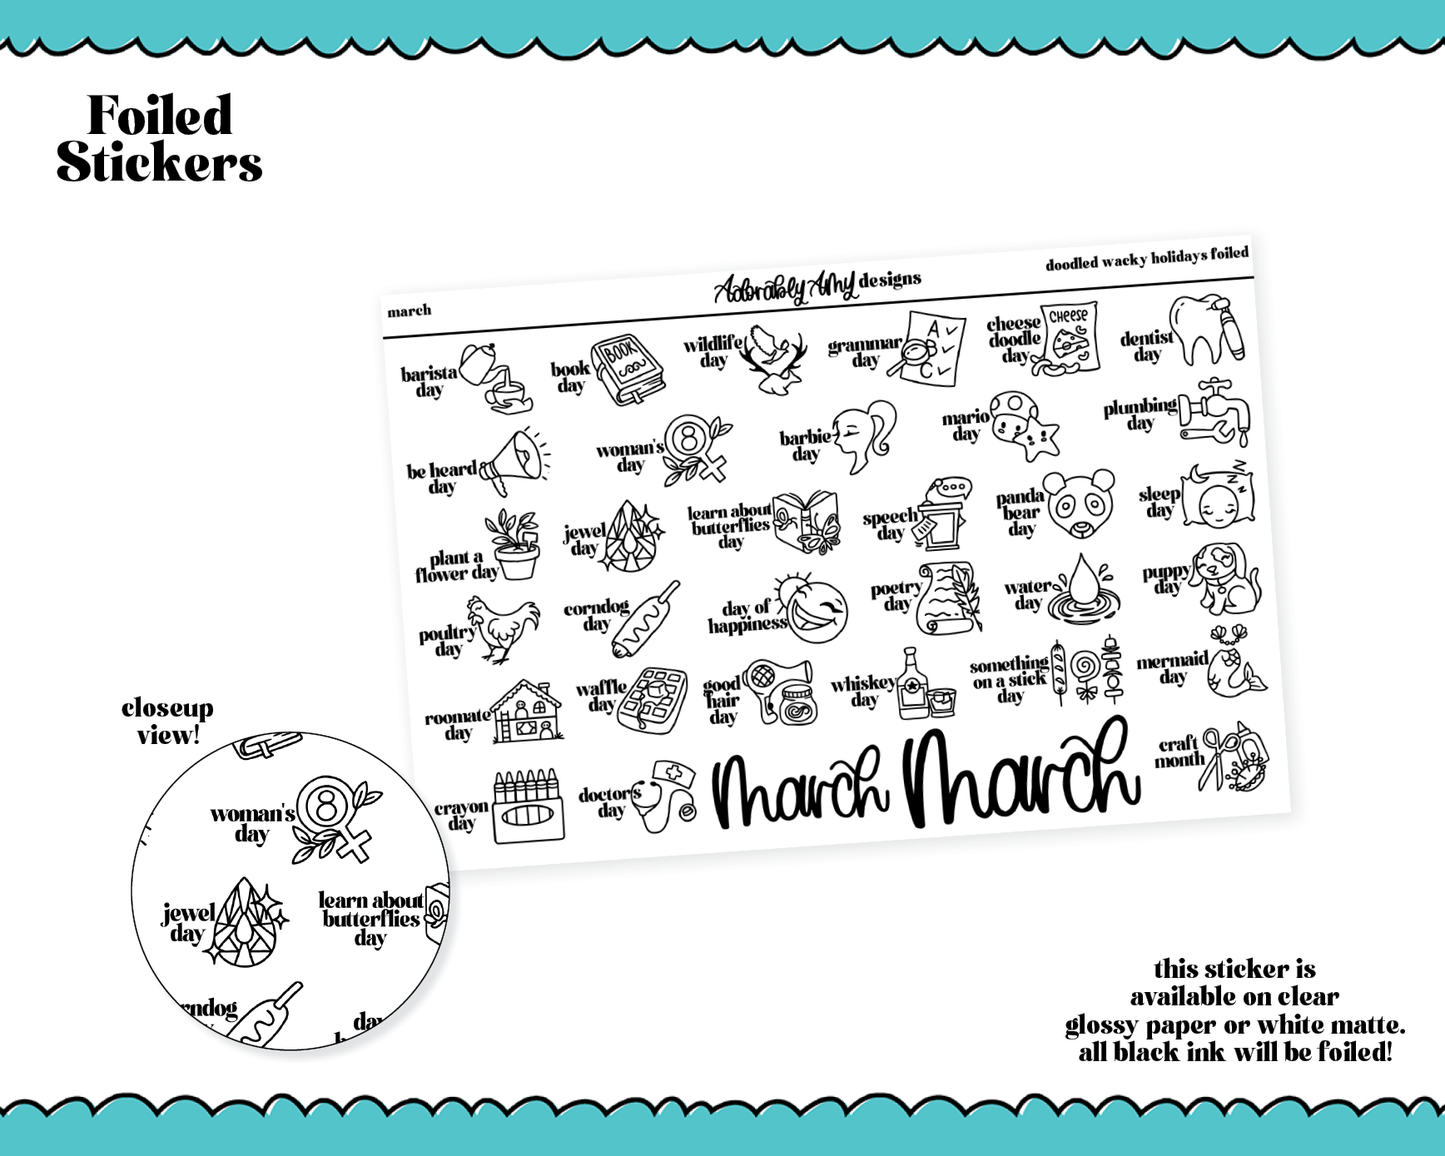 Foiled March Doodled Wacky Holidays Planner Stickers